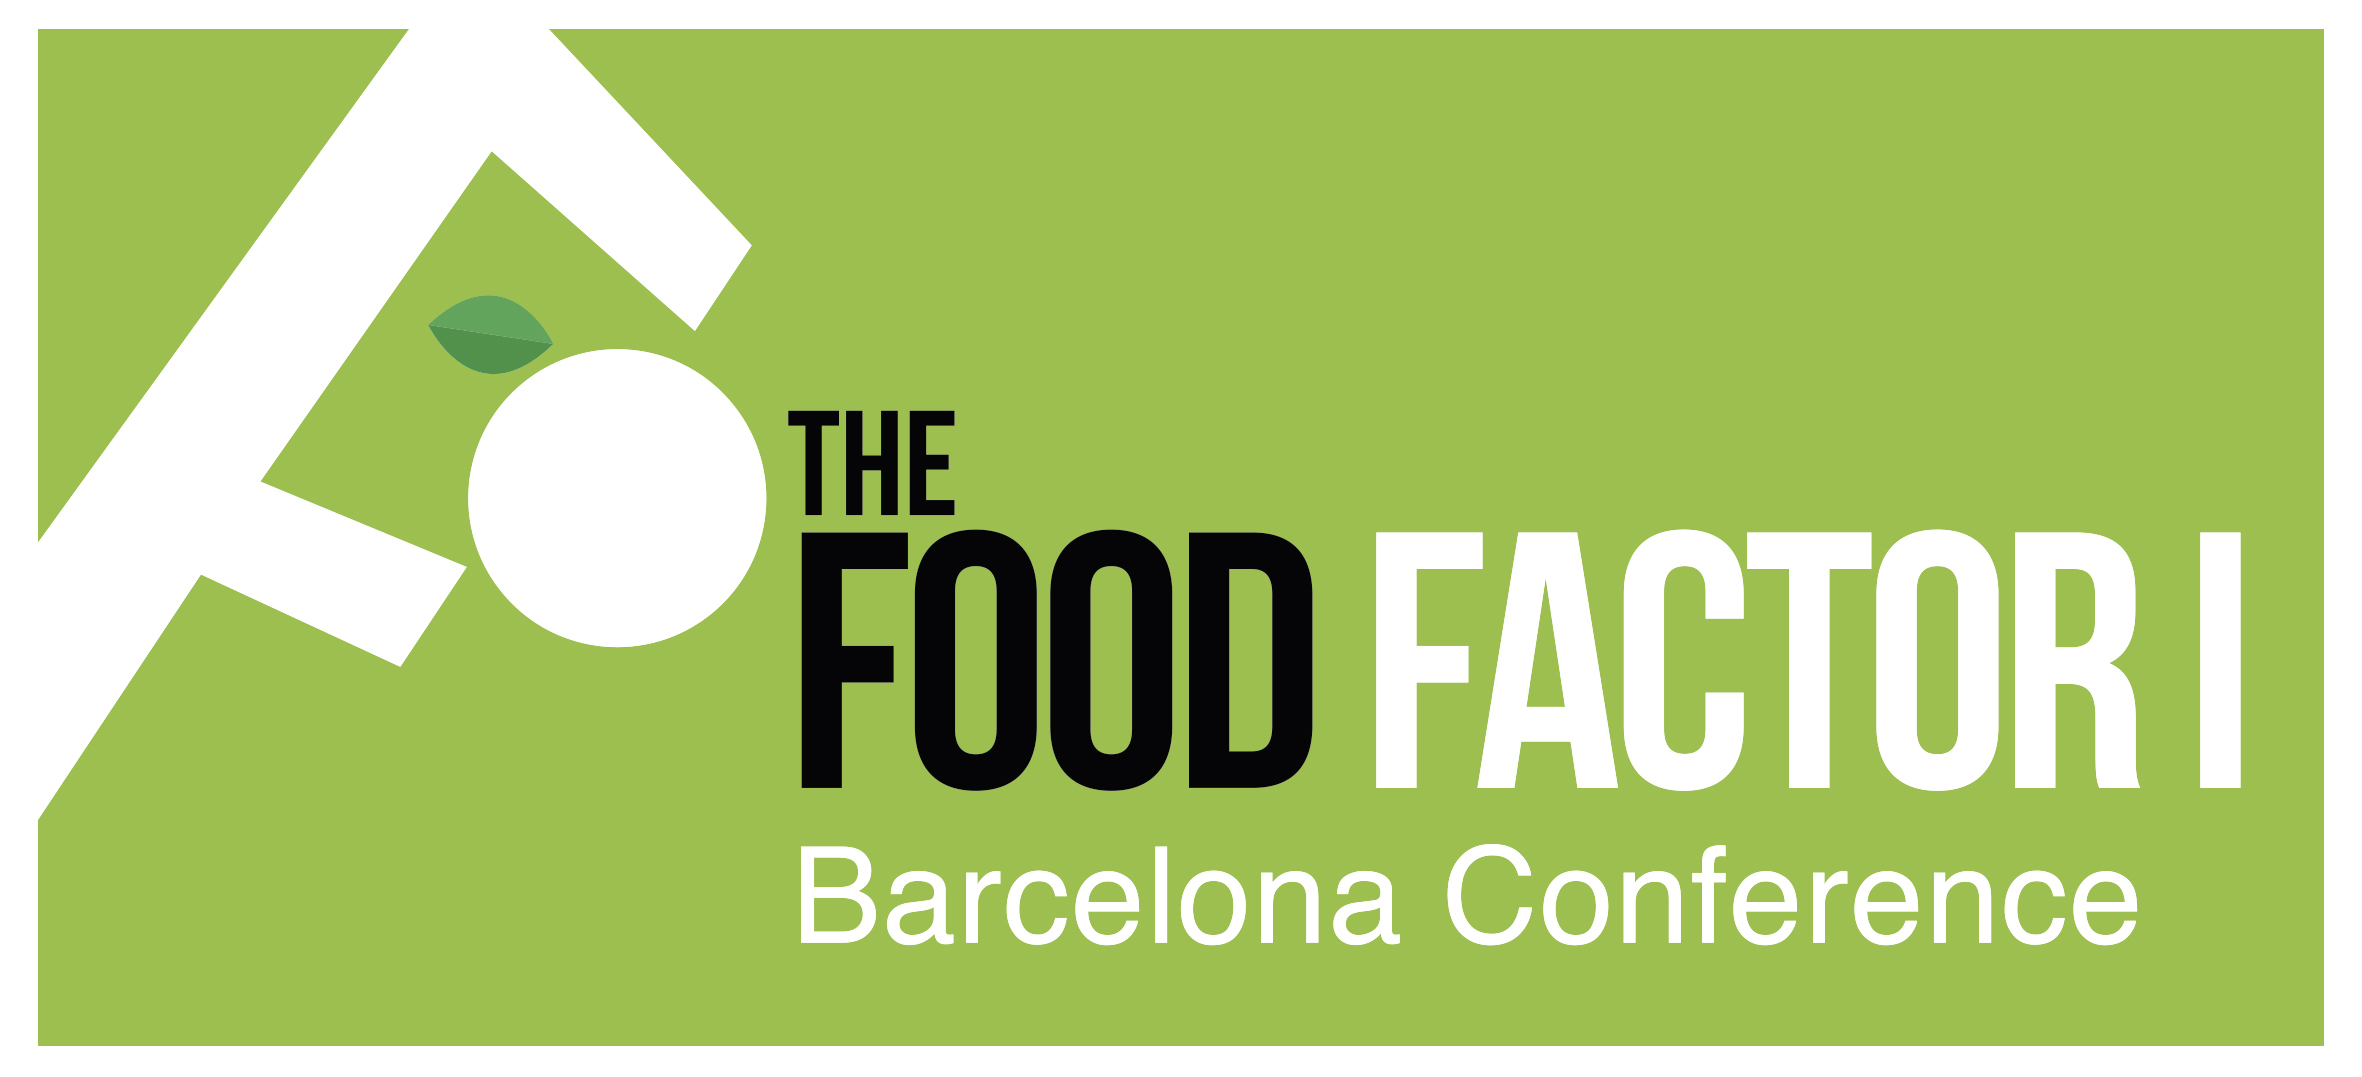 The Food Factor Barcelona Conference